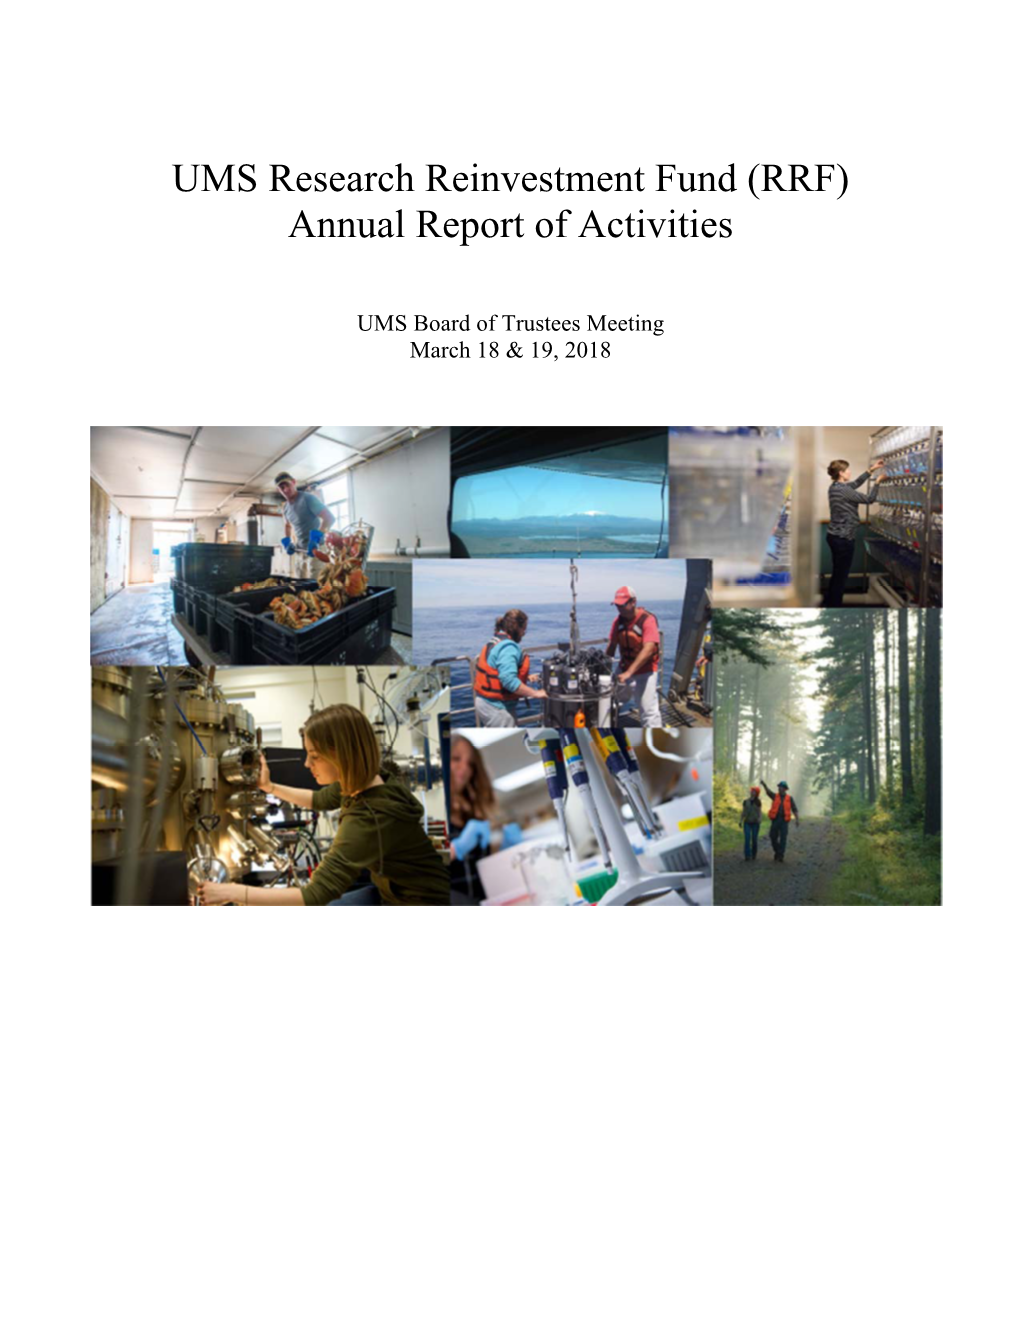 UMS Research Reinvestment Fund (RRF) Annual Report of Activities